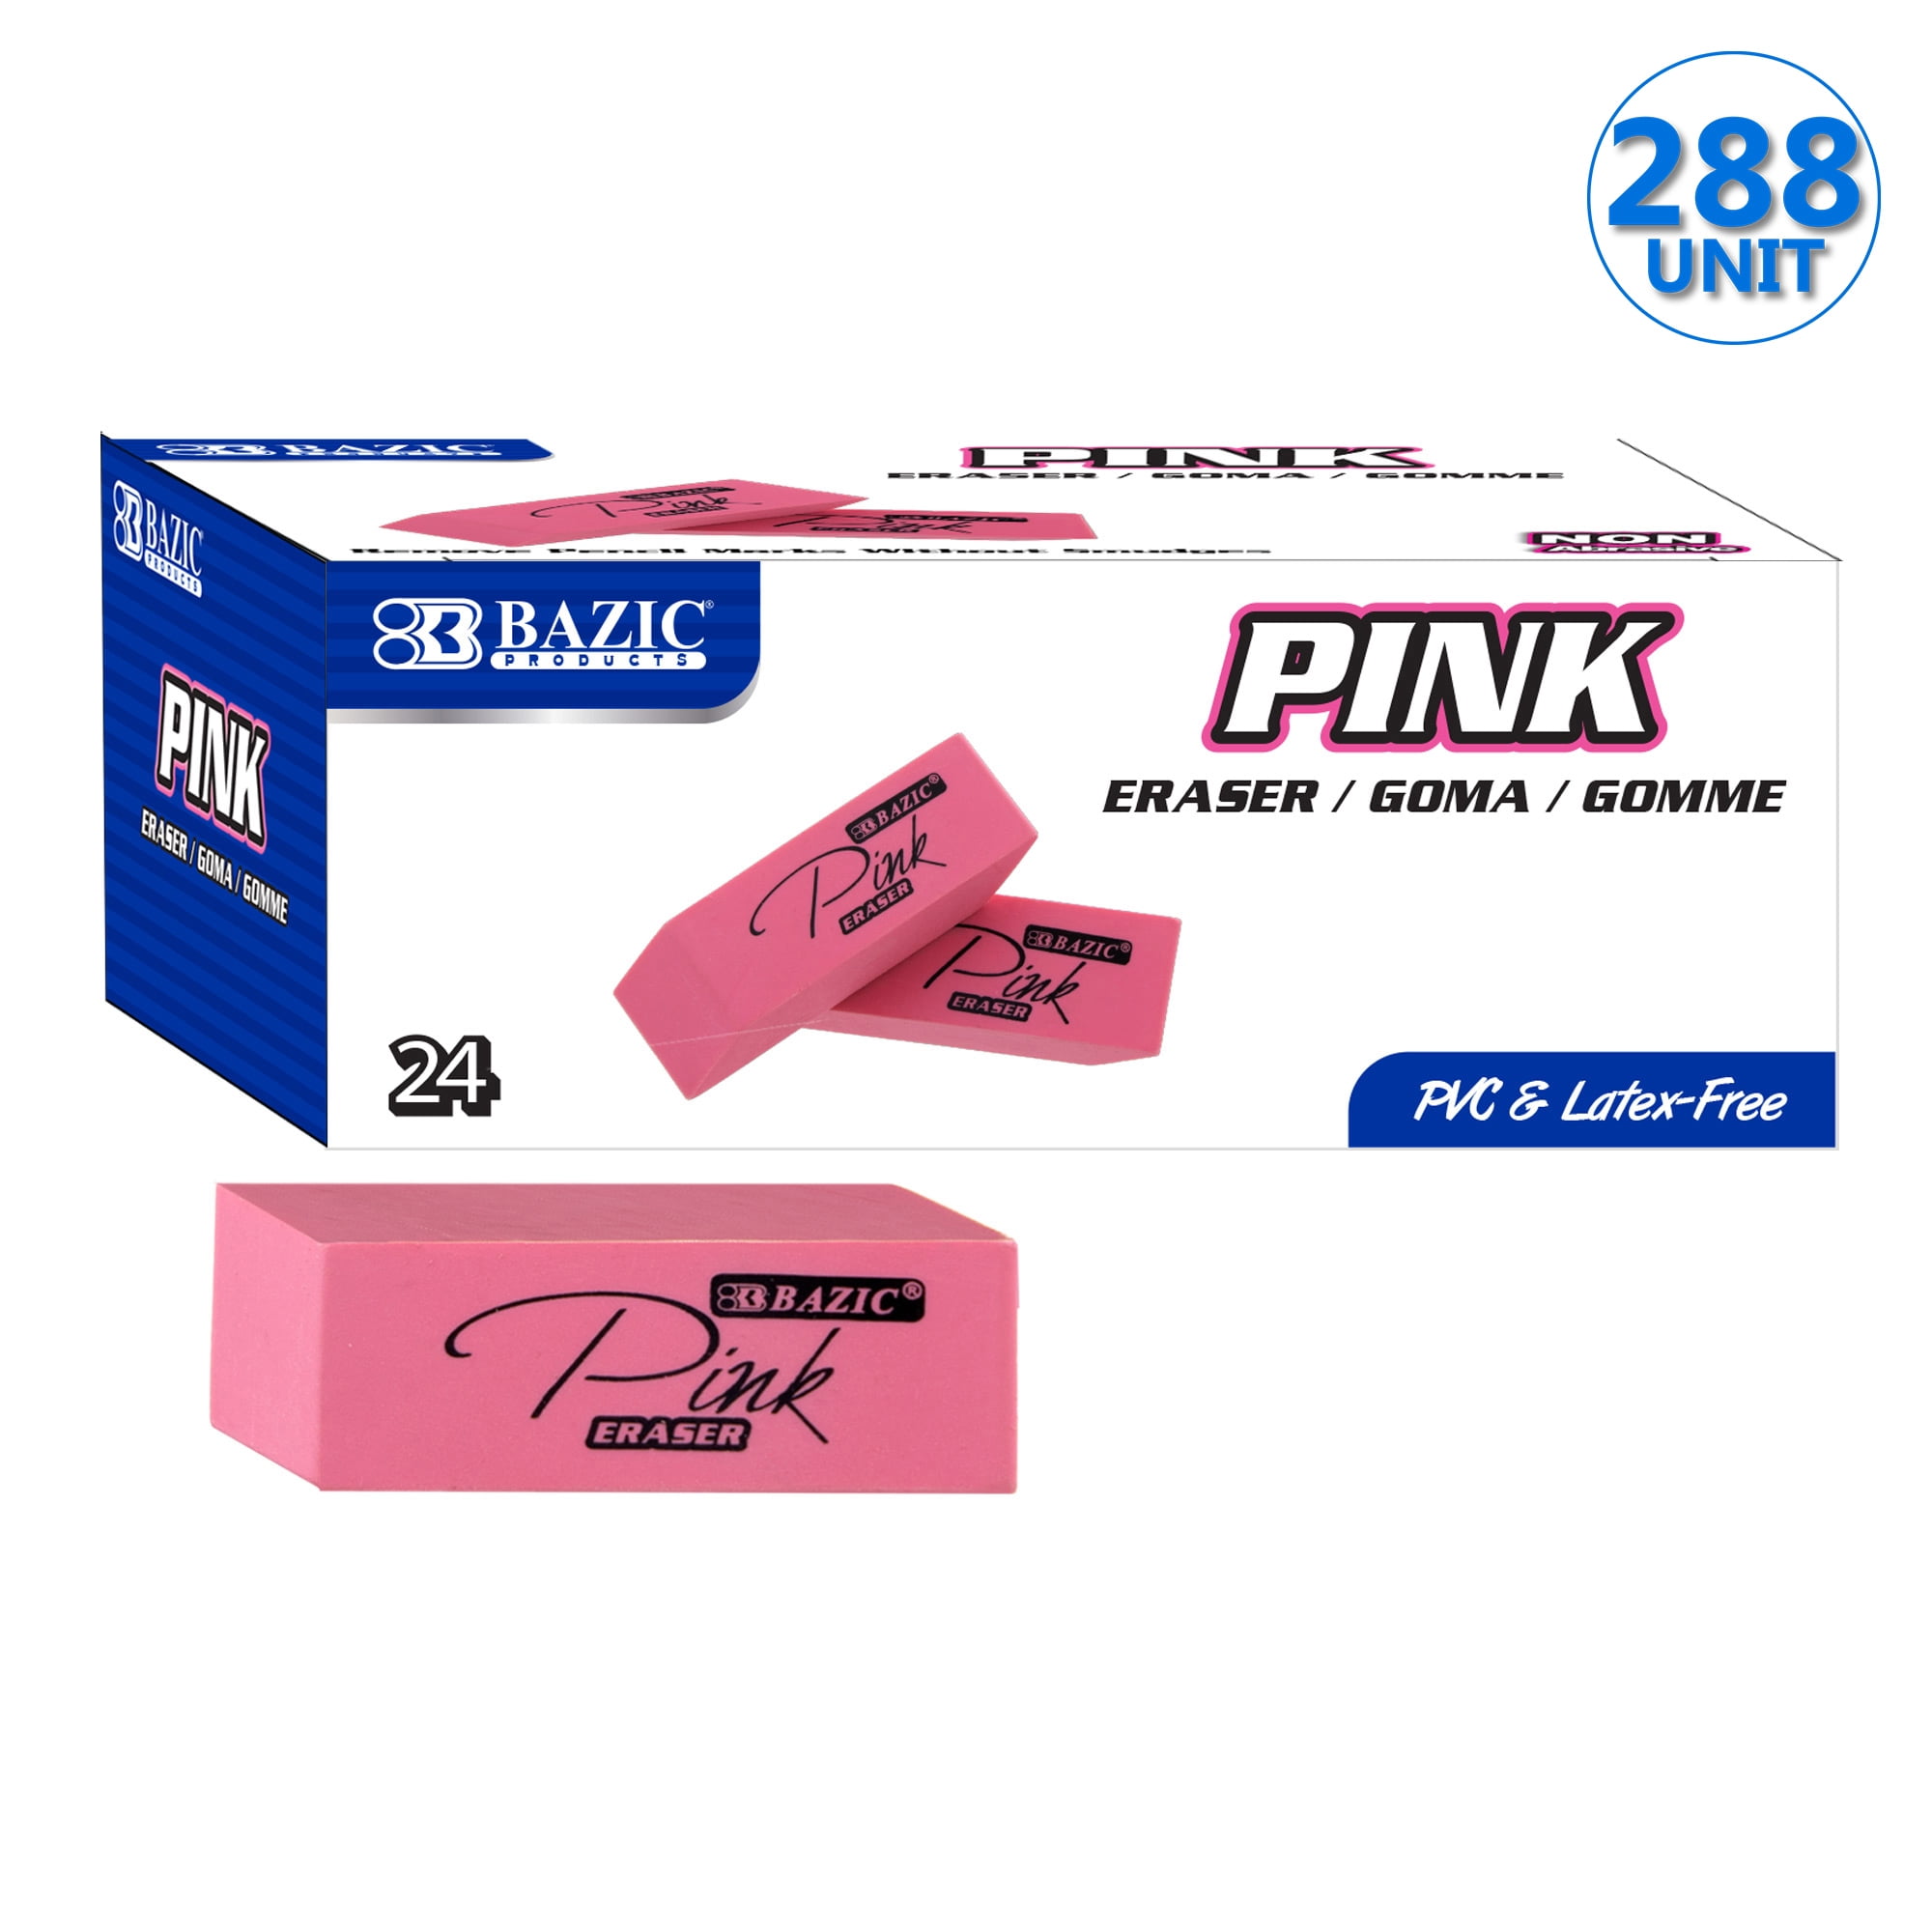 Latex free Brand new eraser lot Durable Pink erasers School/office supplies 